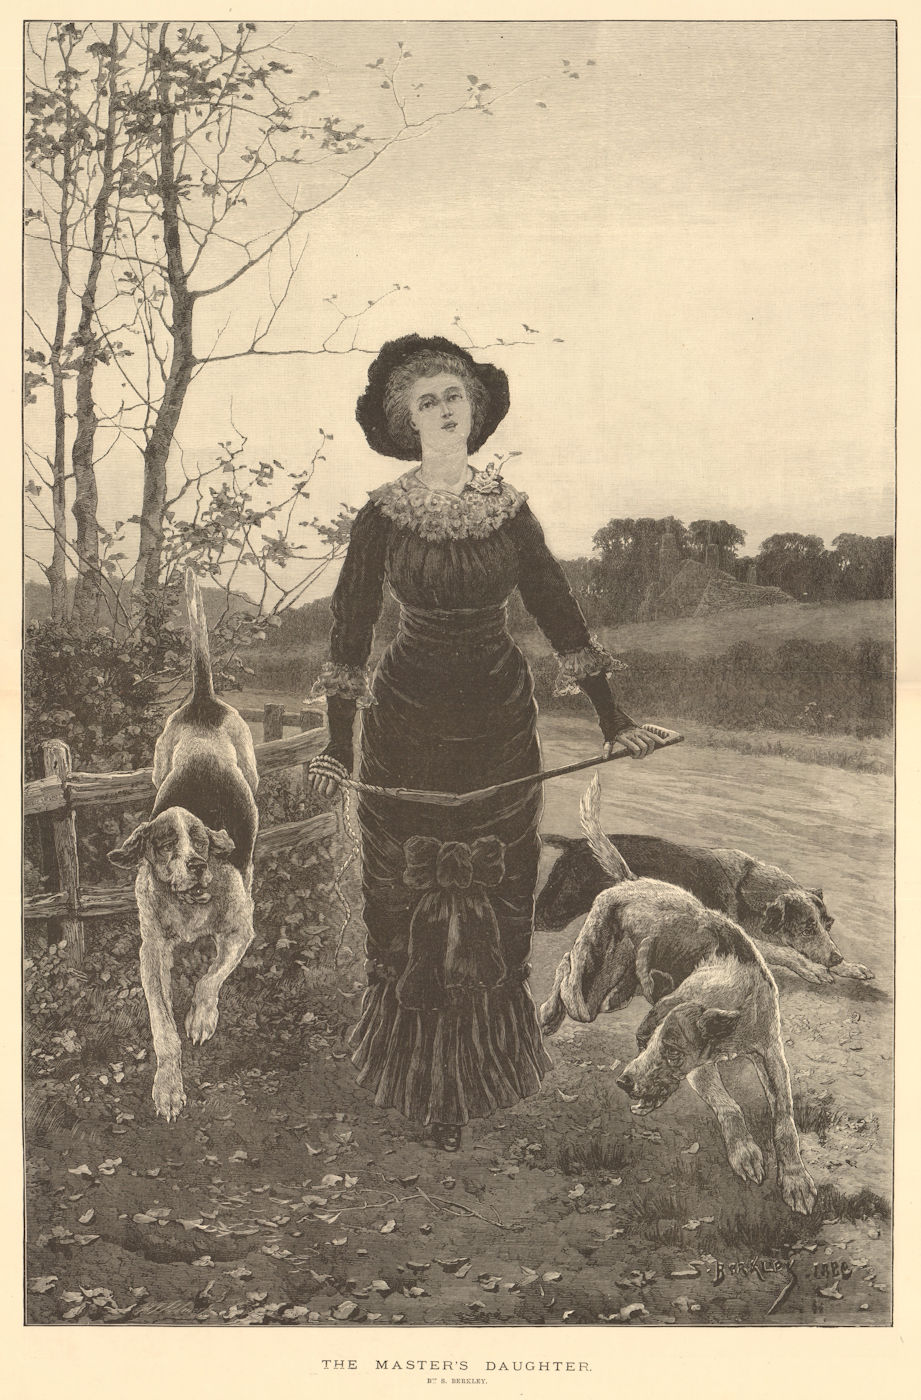 Associate Product "The master's daughter", by S. Berkley. Dogs 1883 antique ILN full page print